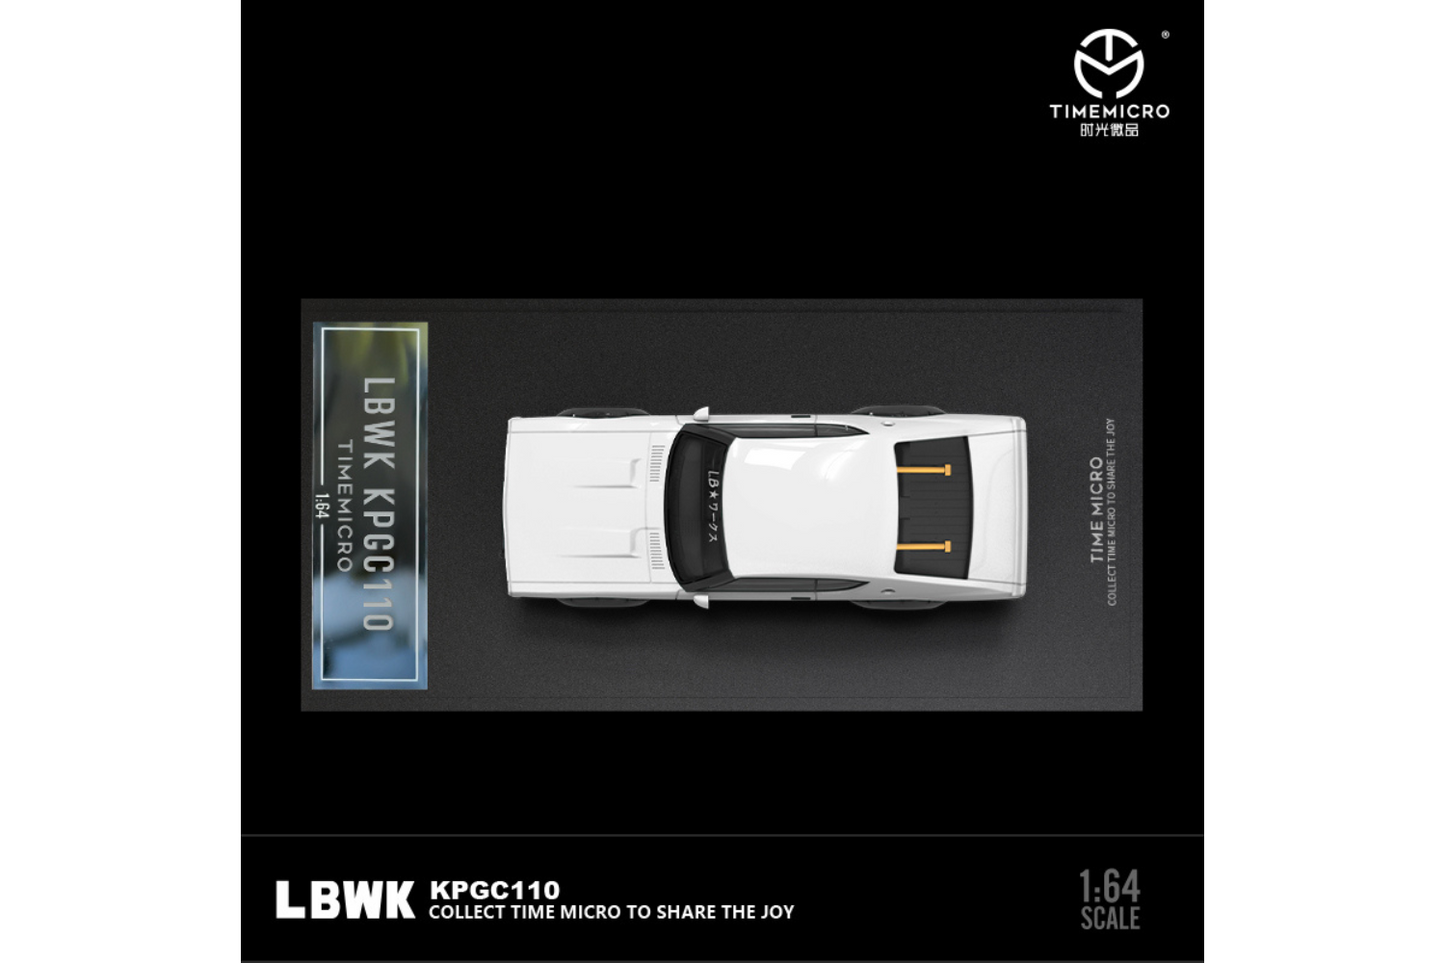 Time Micro 1/64 Nissan Skyline 2000 GT-R LBWK KPGC110 in White